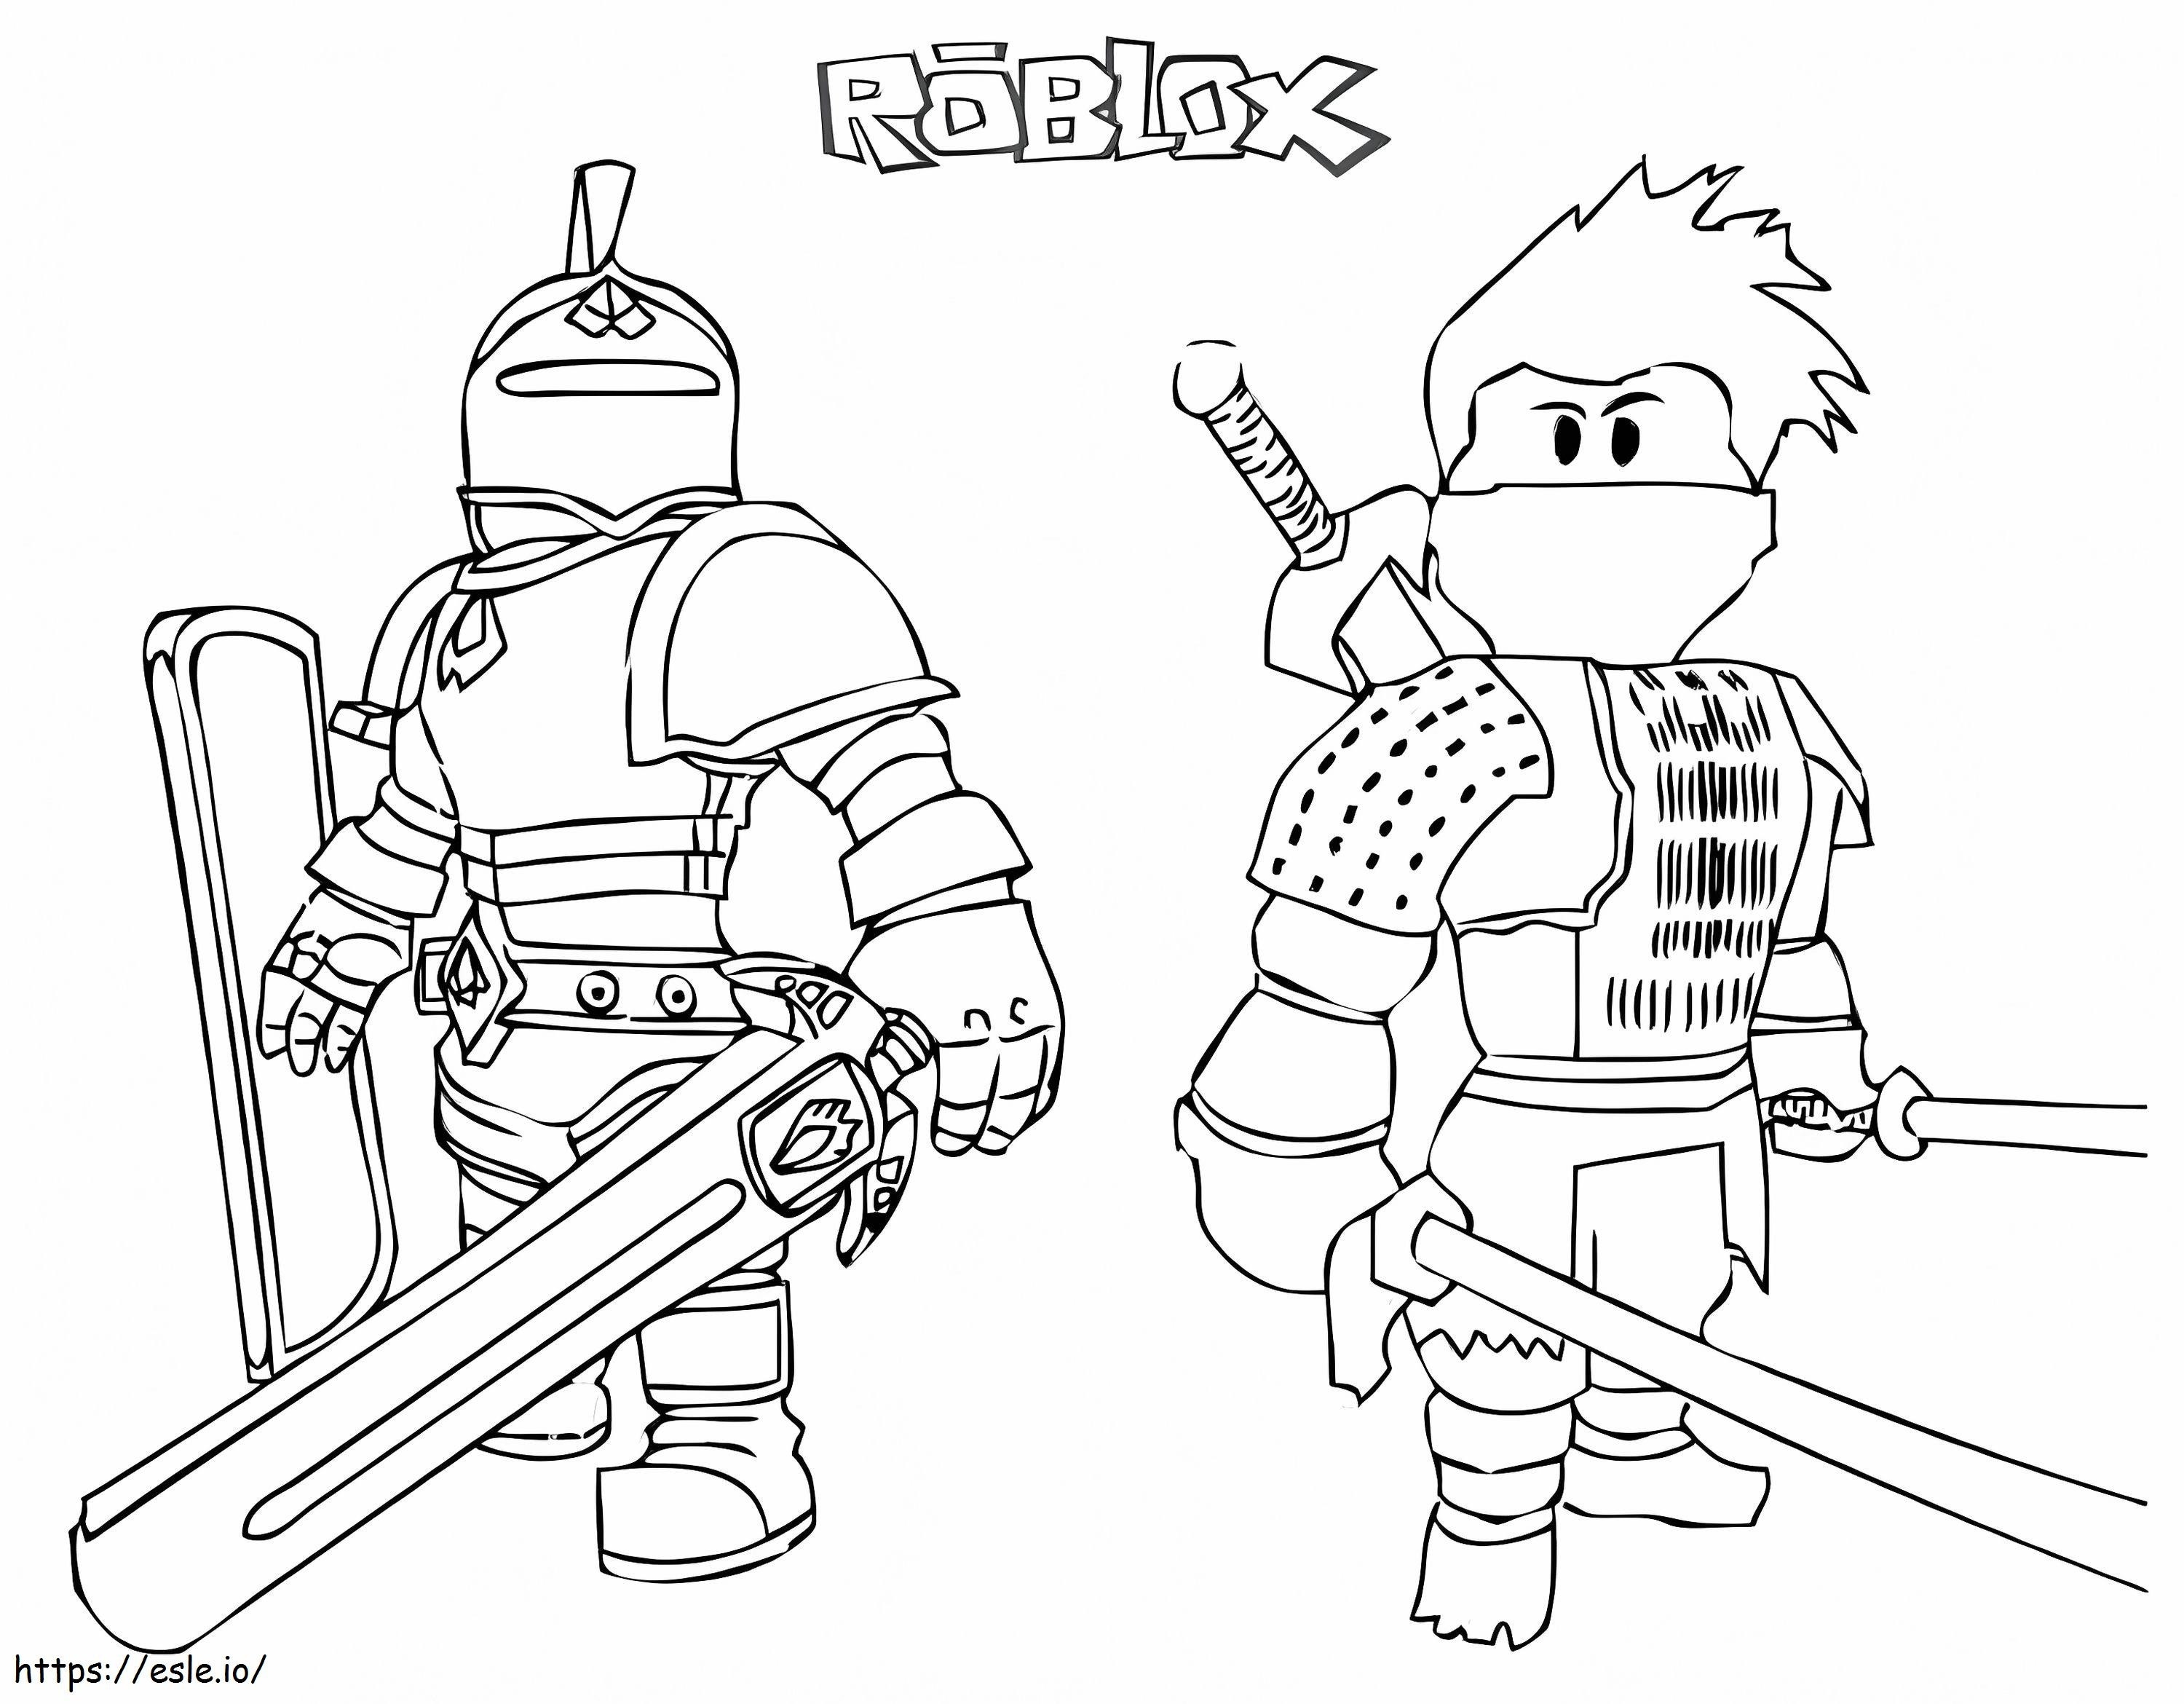 Roblox Knight And Samurai coloring page